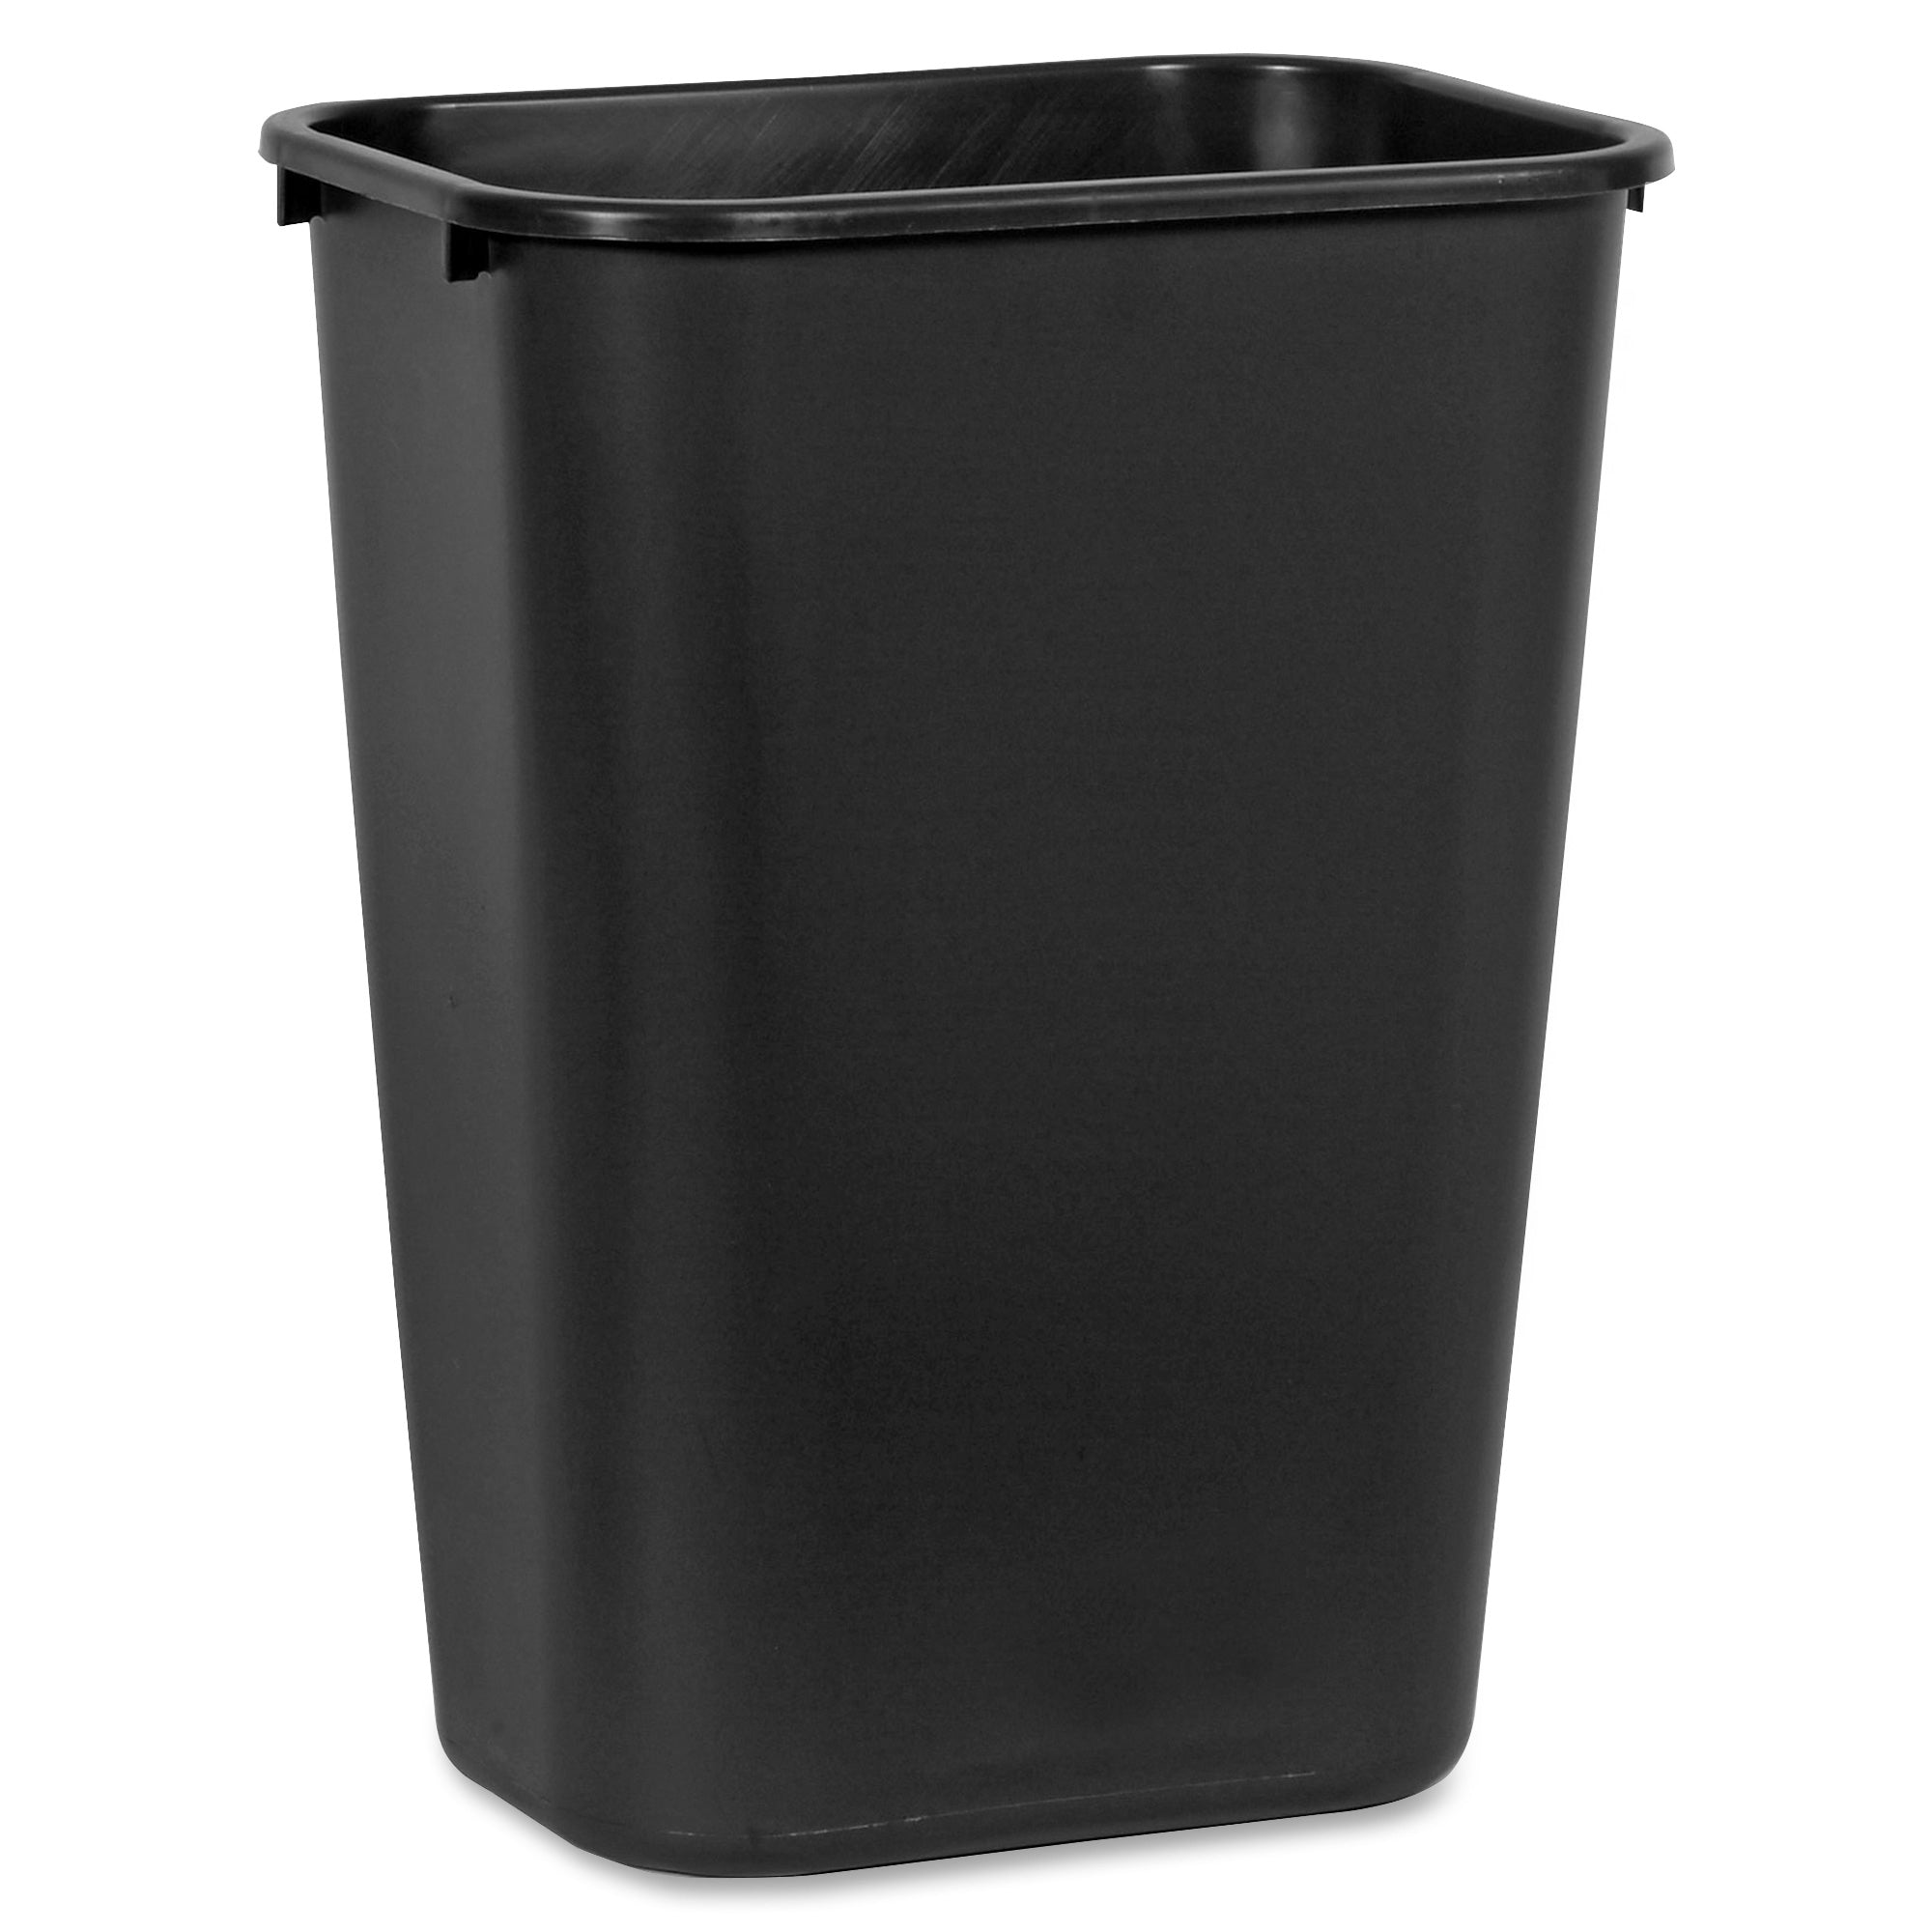 rubbermaid-commercial-41-qt-large-deskside-wastebaskets-1025-gal-capacity-rectangular-dent-resistant-durable-rust-resistant-easy-to-clean-20-height-x-113-width-x-153-depth-plastic-black-12-carton_rcp295700bkct - 1